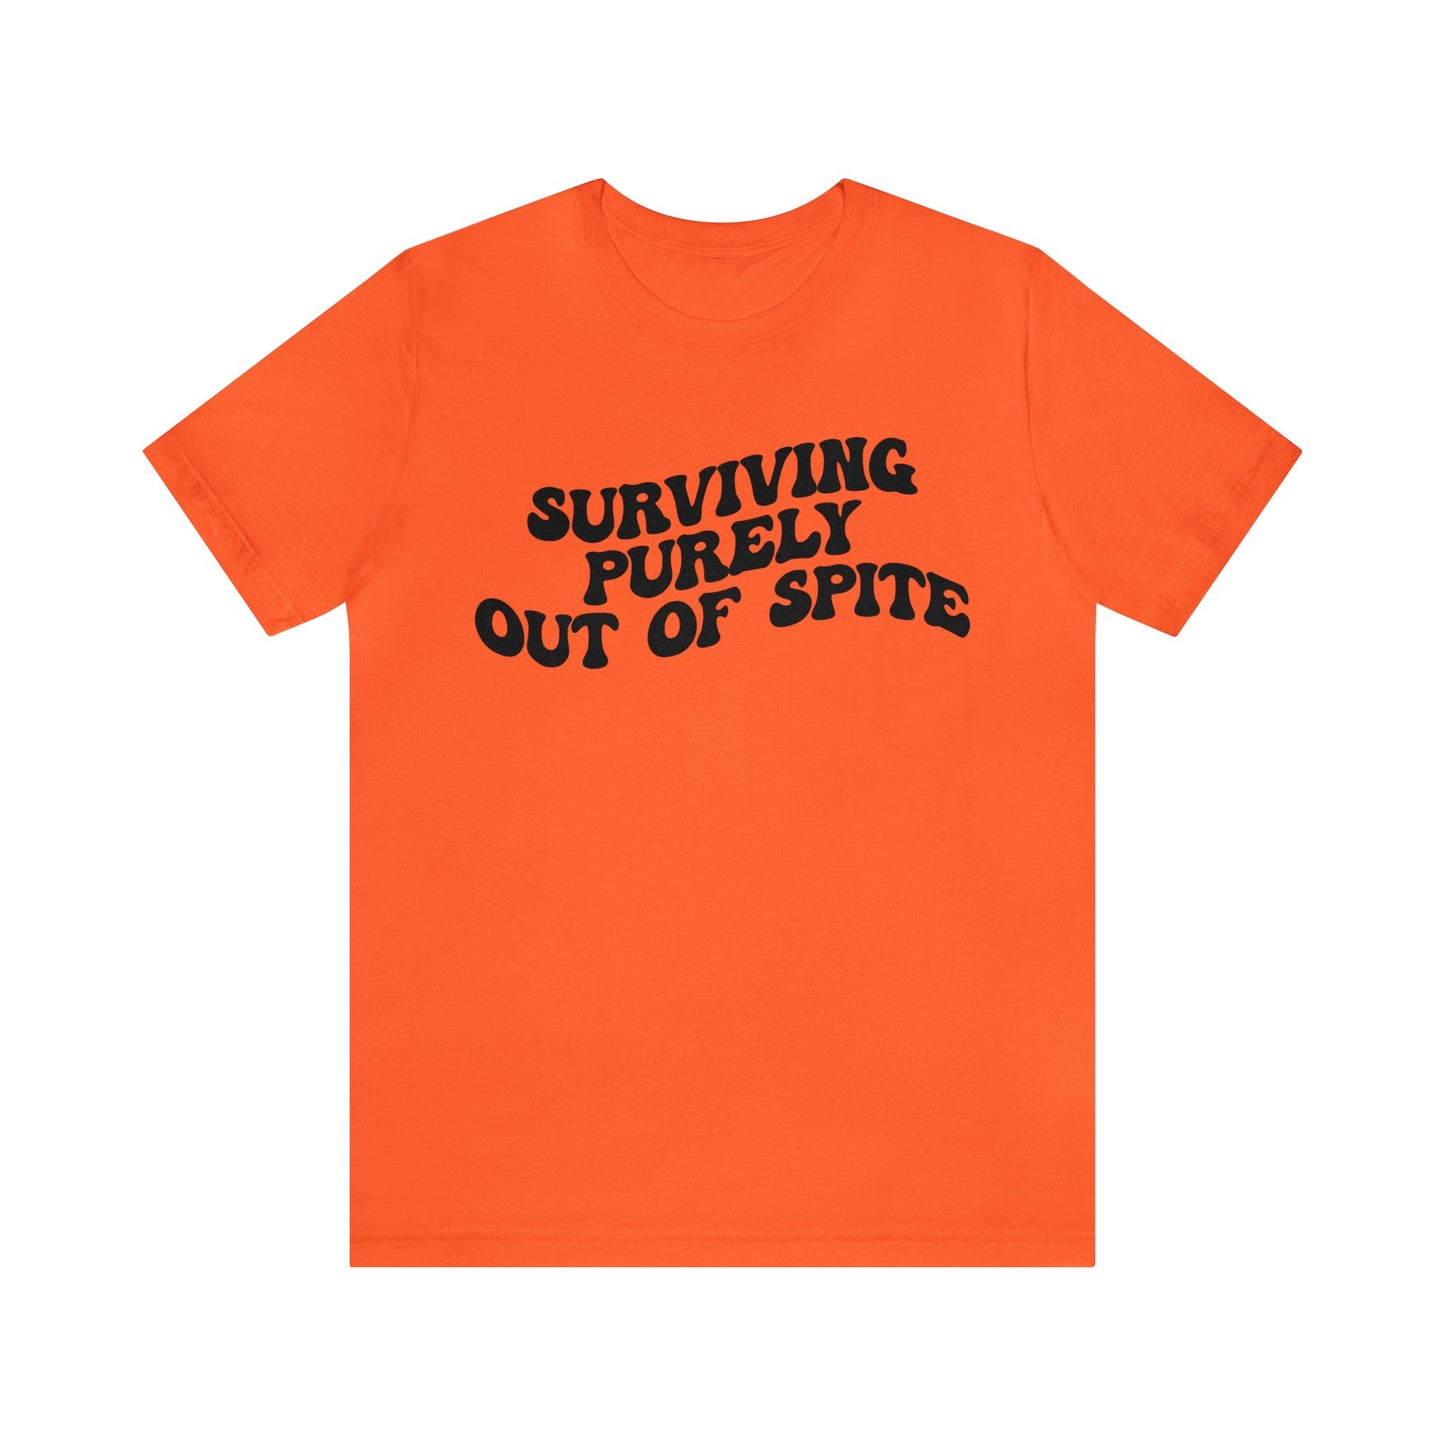 Surviving Purely Out of Spite Shirt, Mental Health, Strong Woman, Cancer Survivor, Survivor Shirt, Strong Empowered Women, Iron Lady, T1408